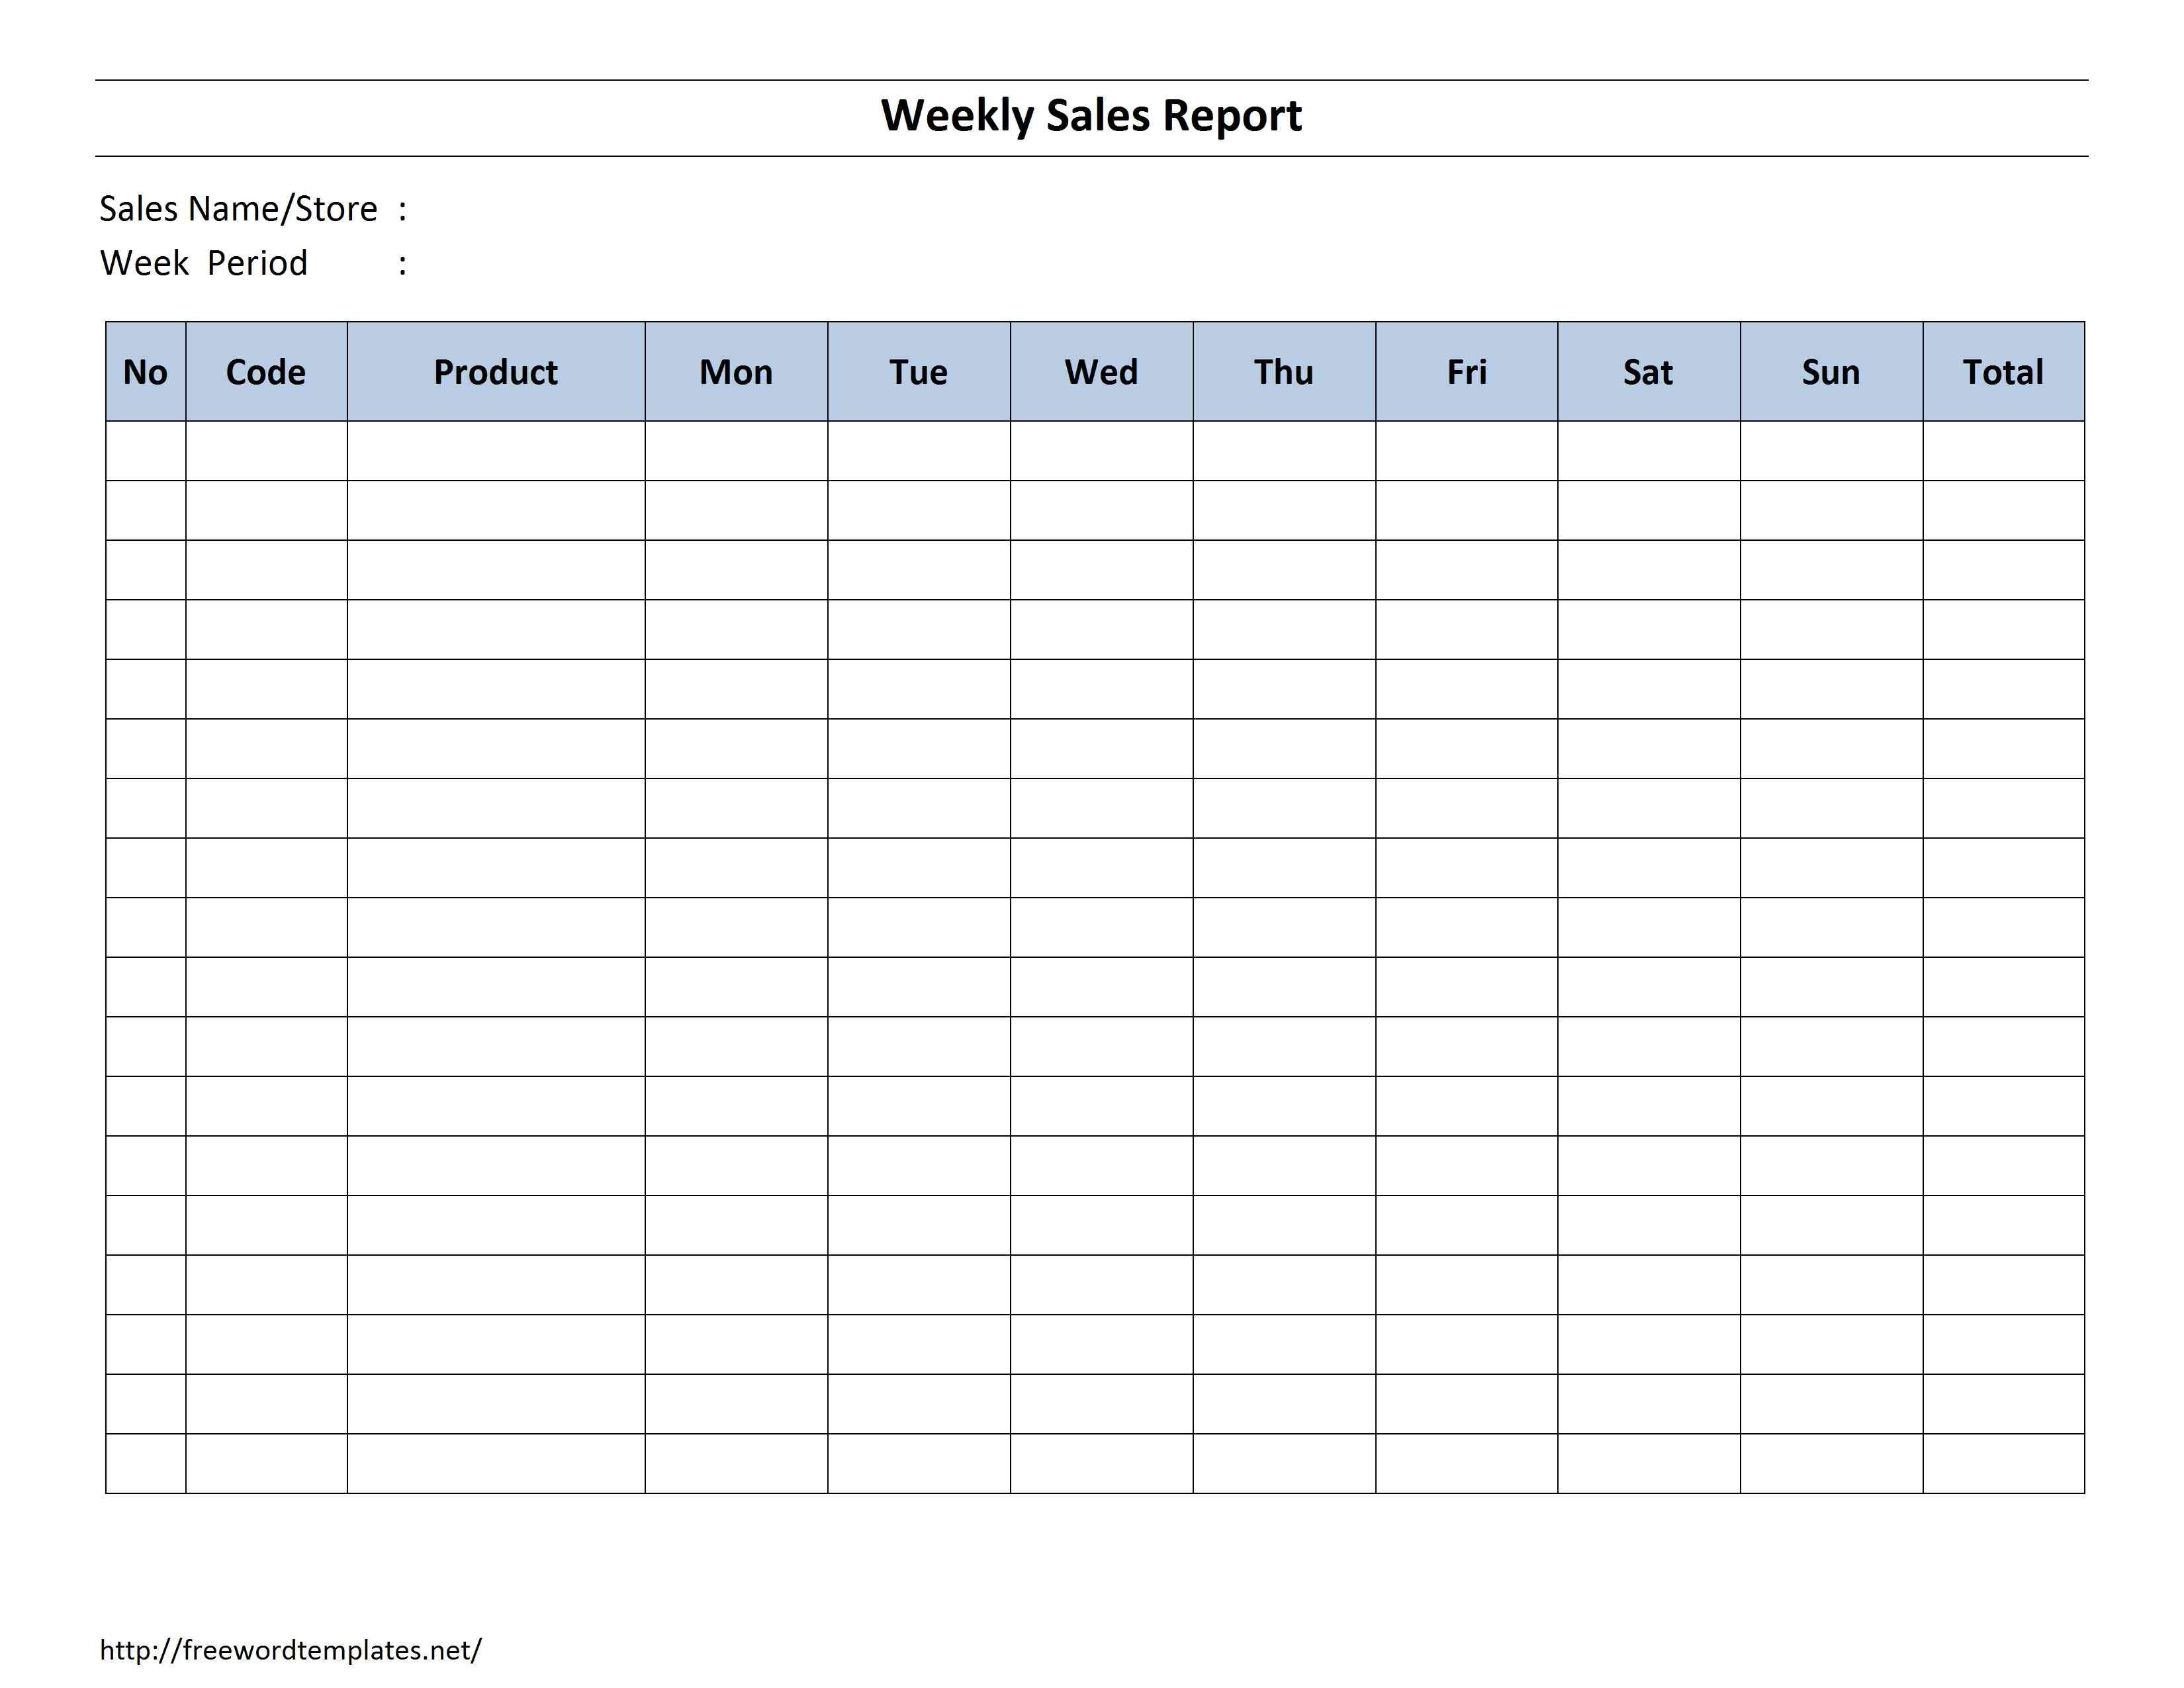 Weekly Sales Reports Templates Weekly Sales Report